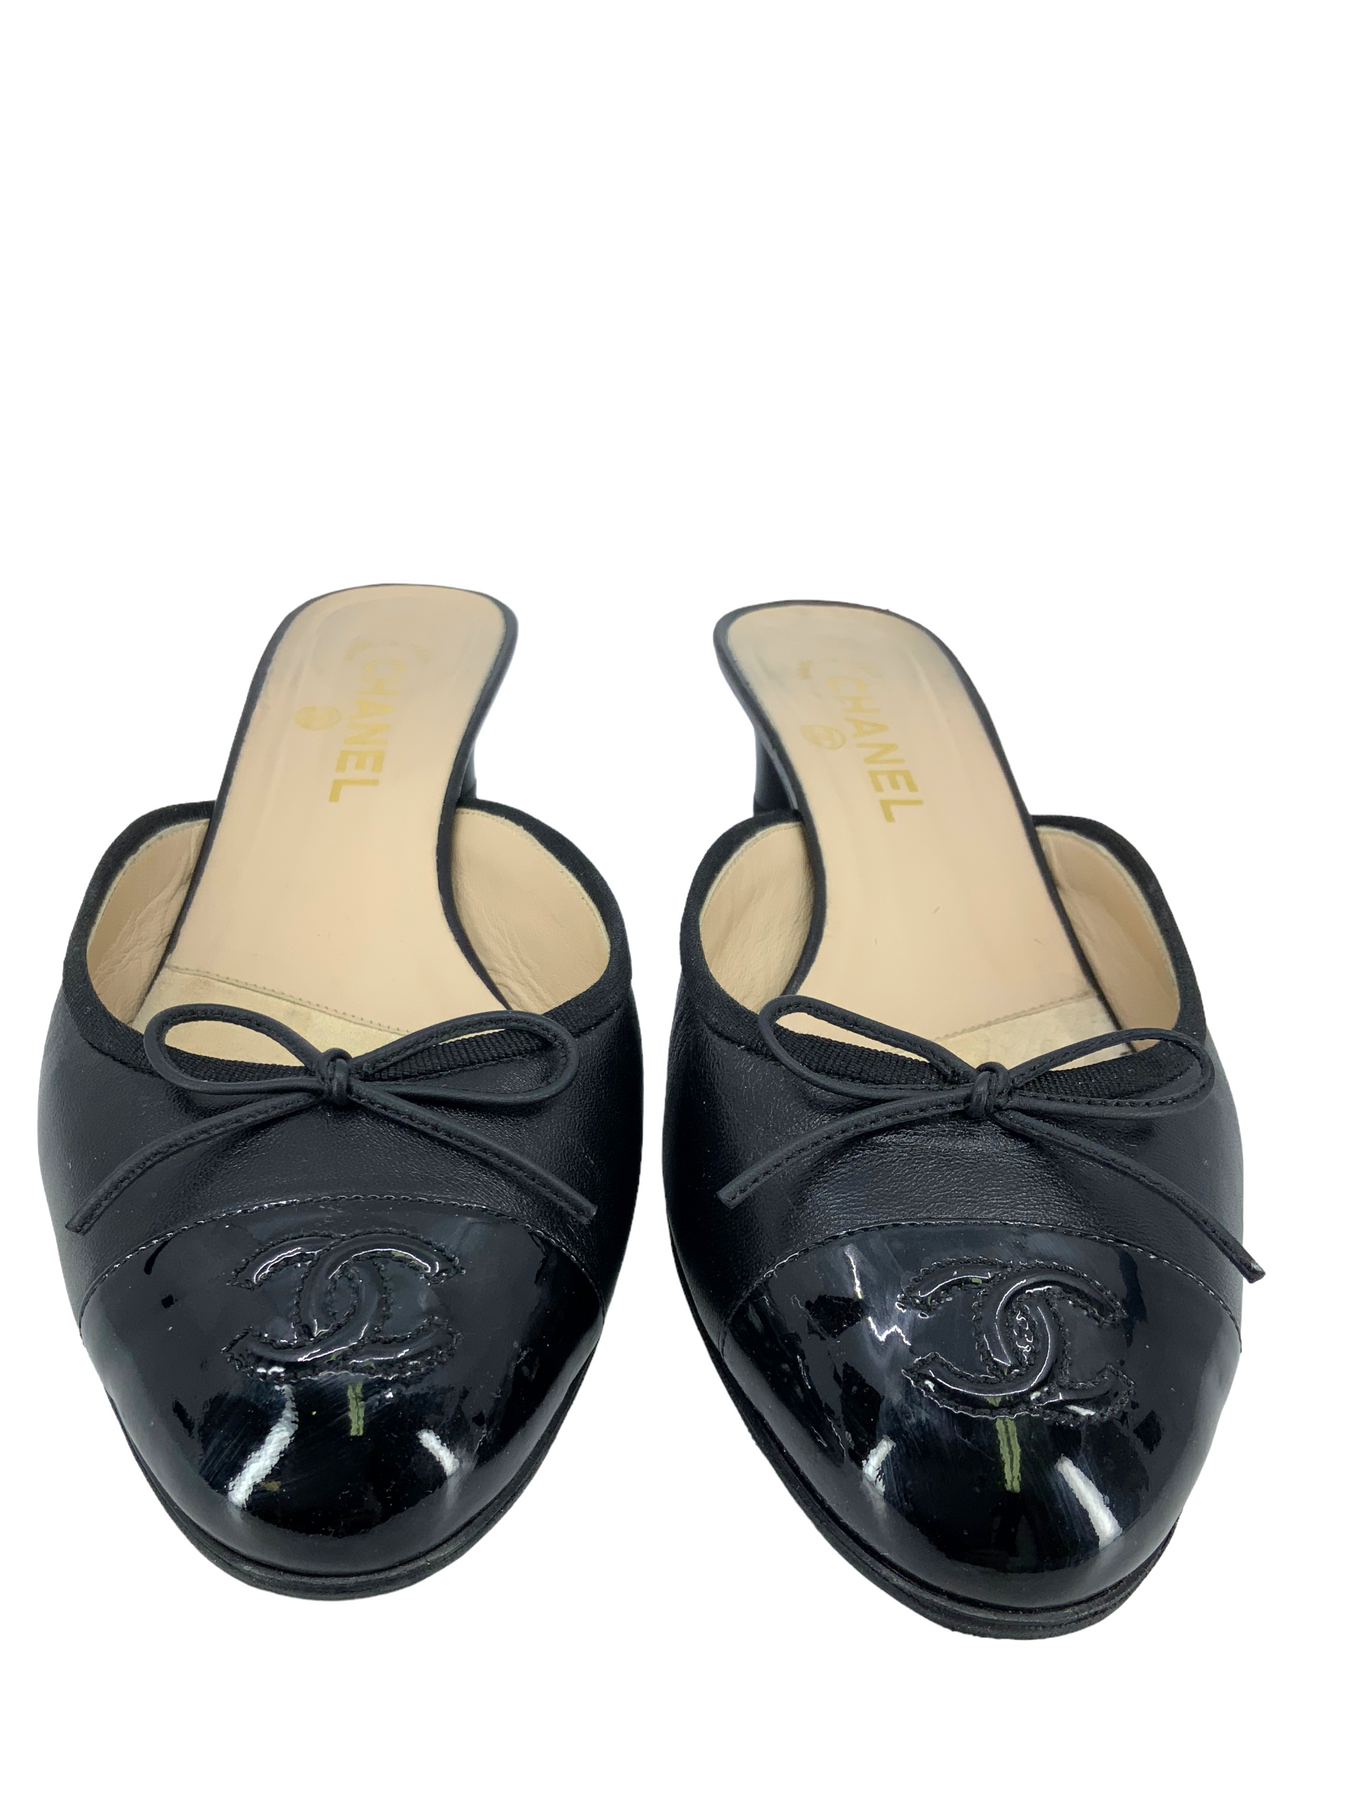 Chanel Leather CC Cap Toe Mules Size 11 - Consigned Designs